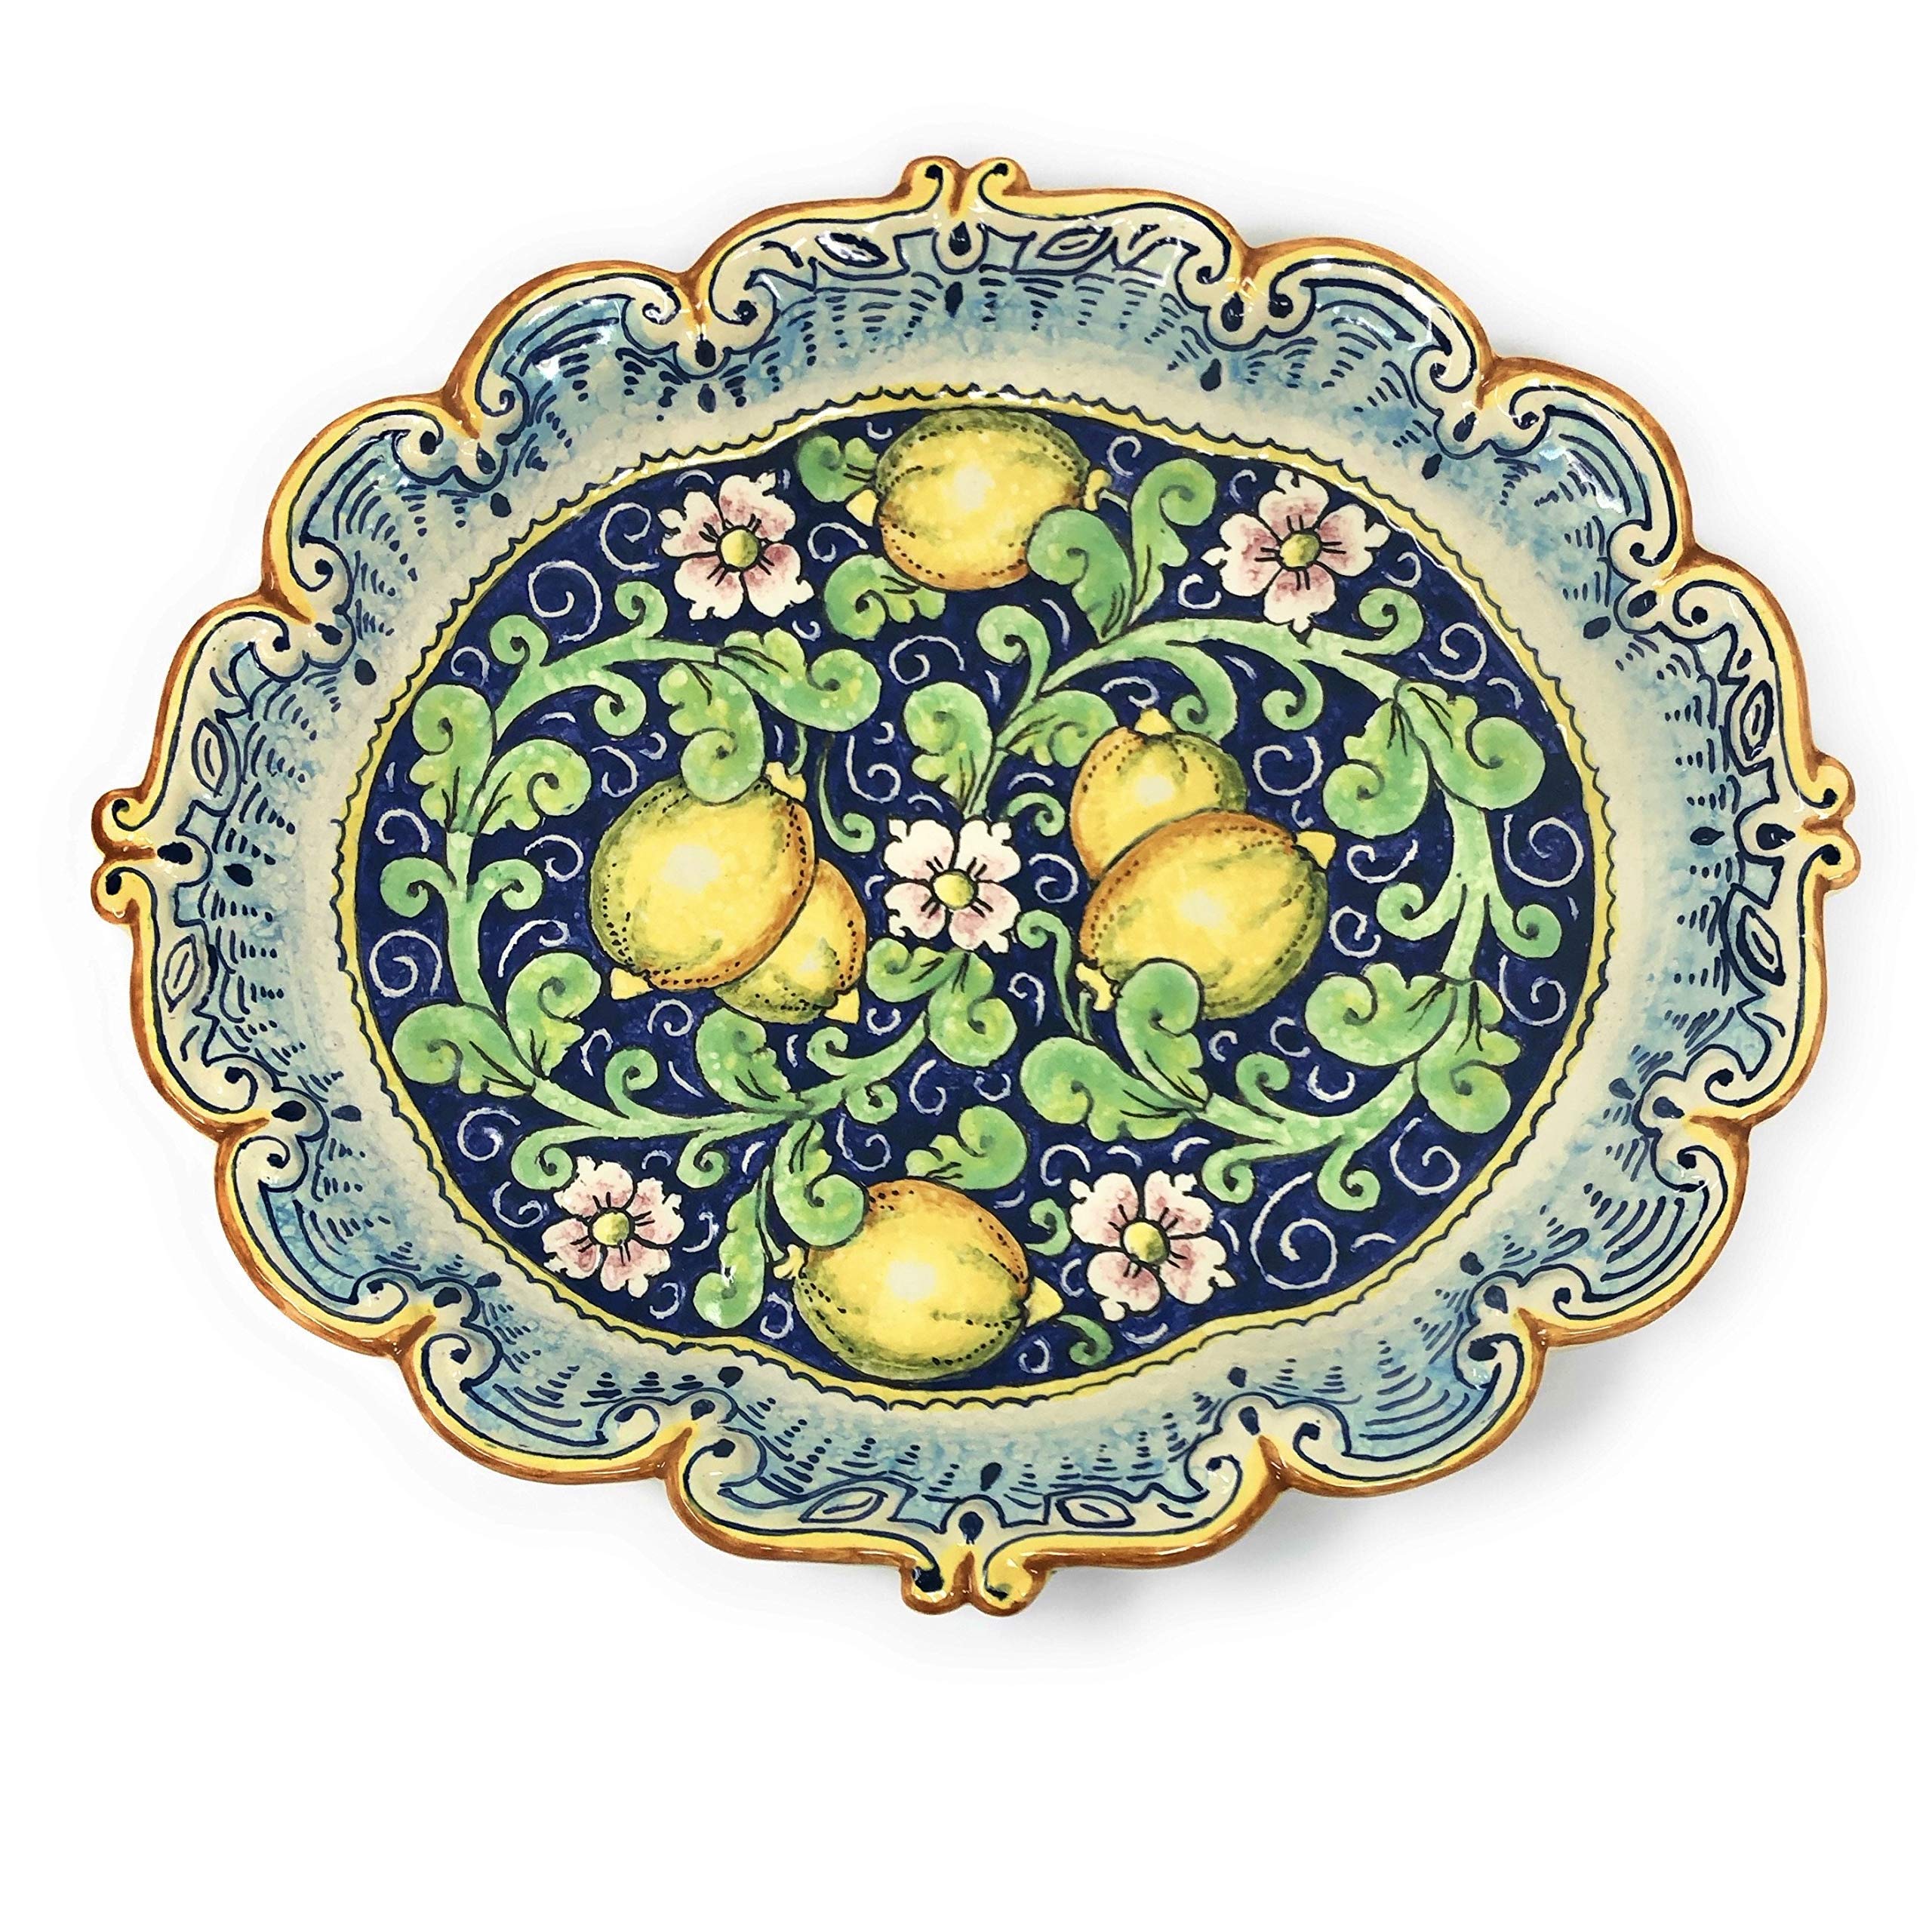 CERAMICHE D'ARTE PARRINI - Italian Ceramic Tray Serving Plate Lemons Art Pottery Paint Made in ITALY Tuscan